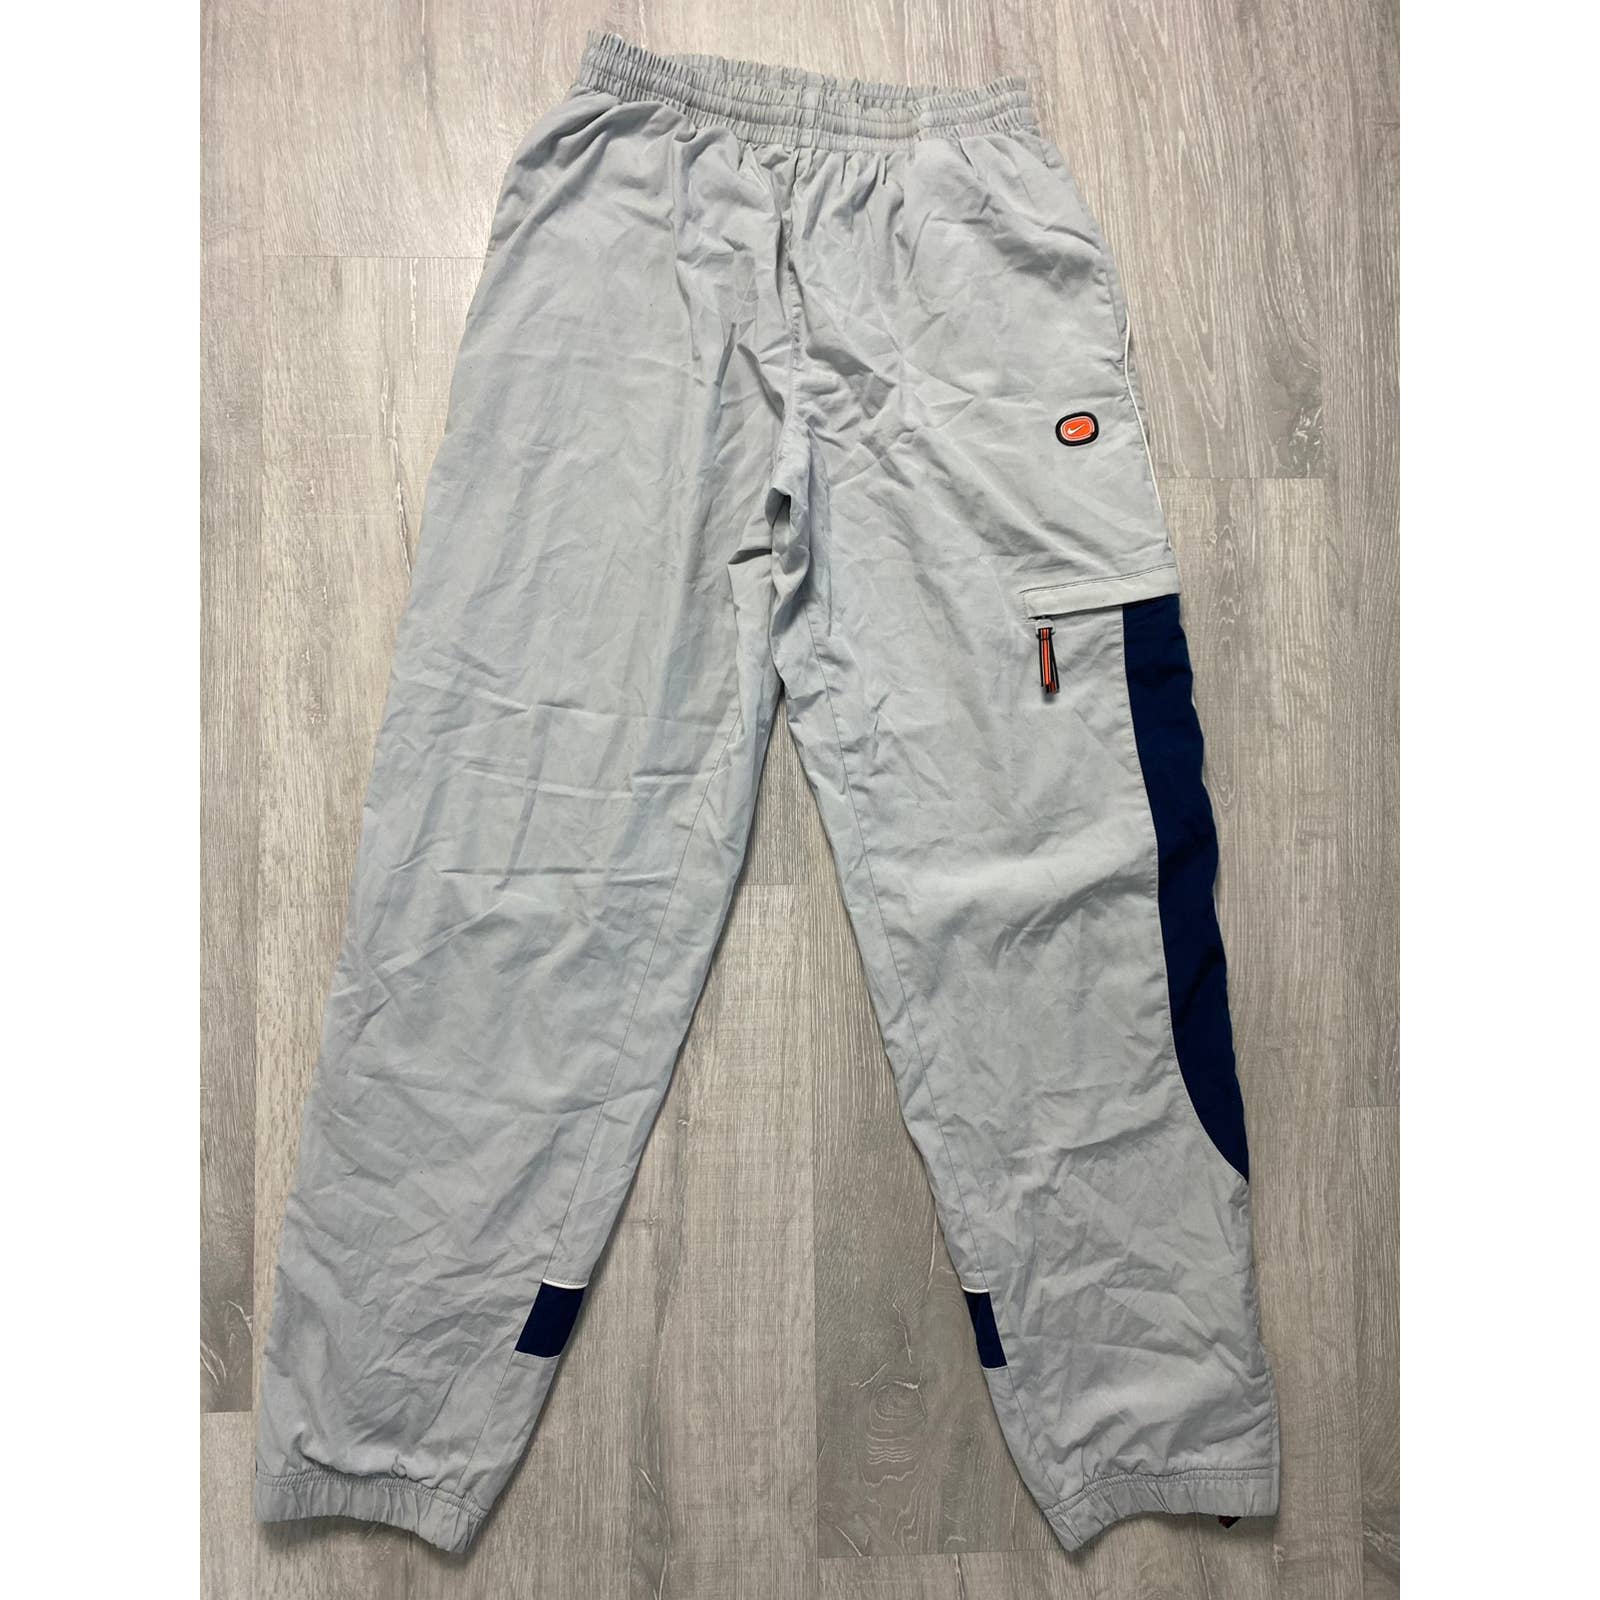 Nike vintage grey track pants small logo 2000s cargo – Refitted